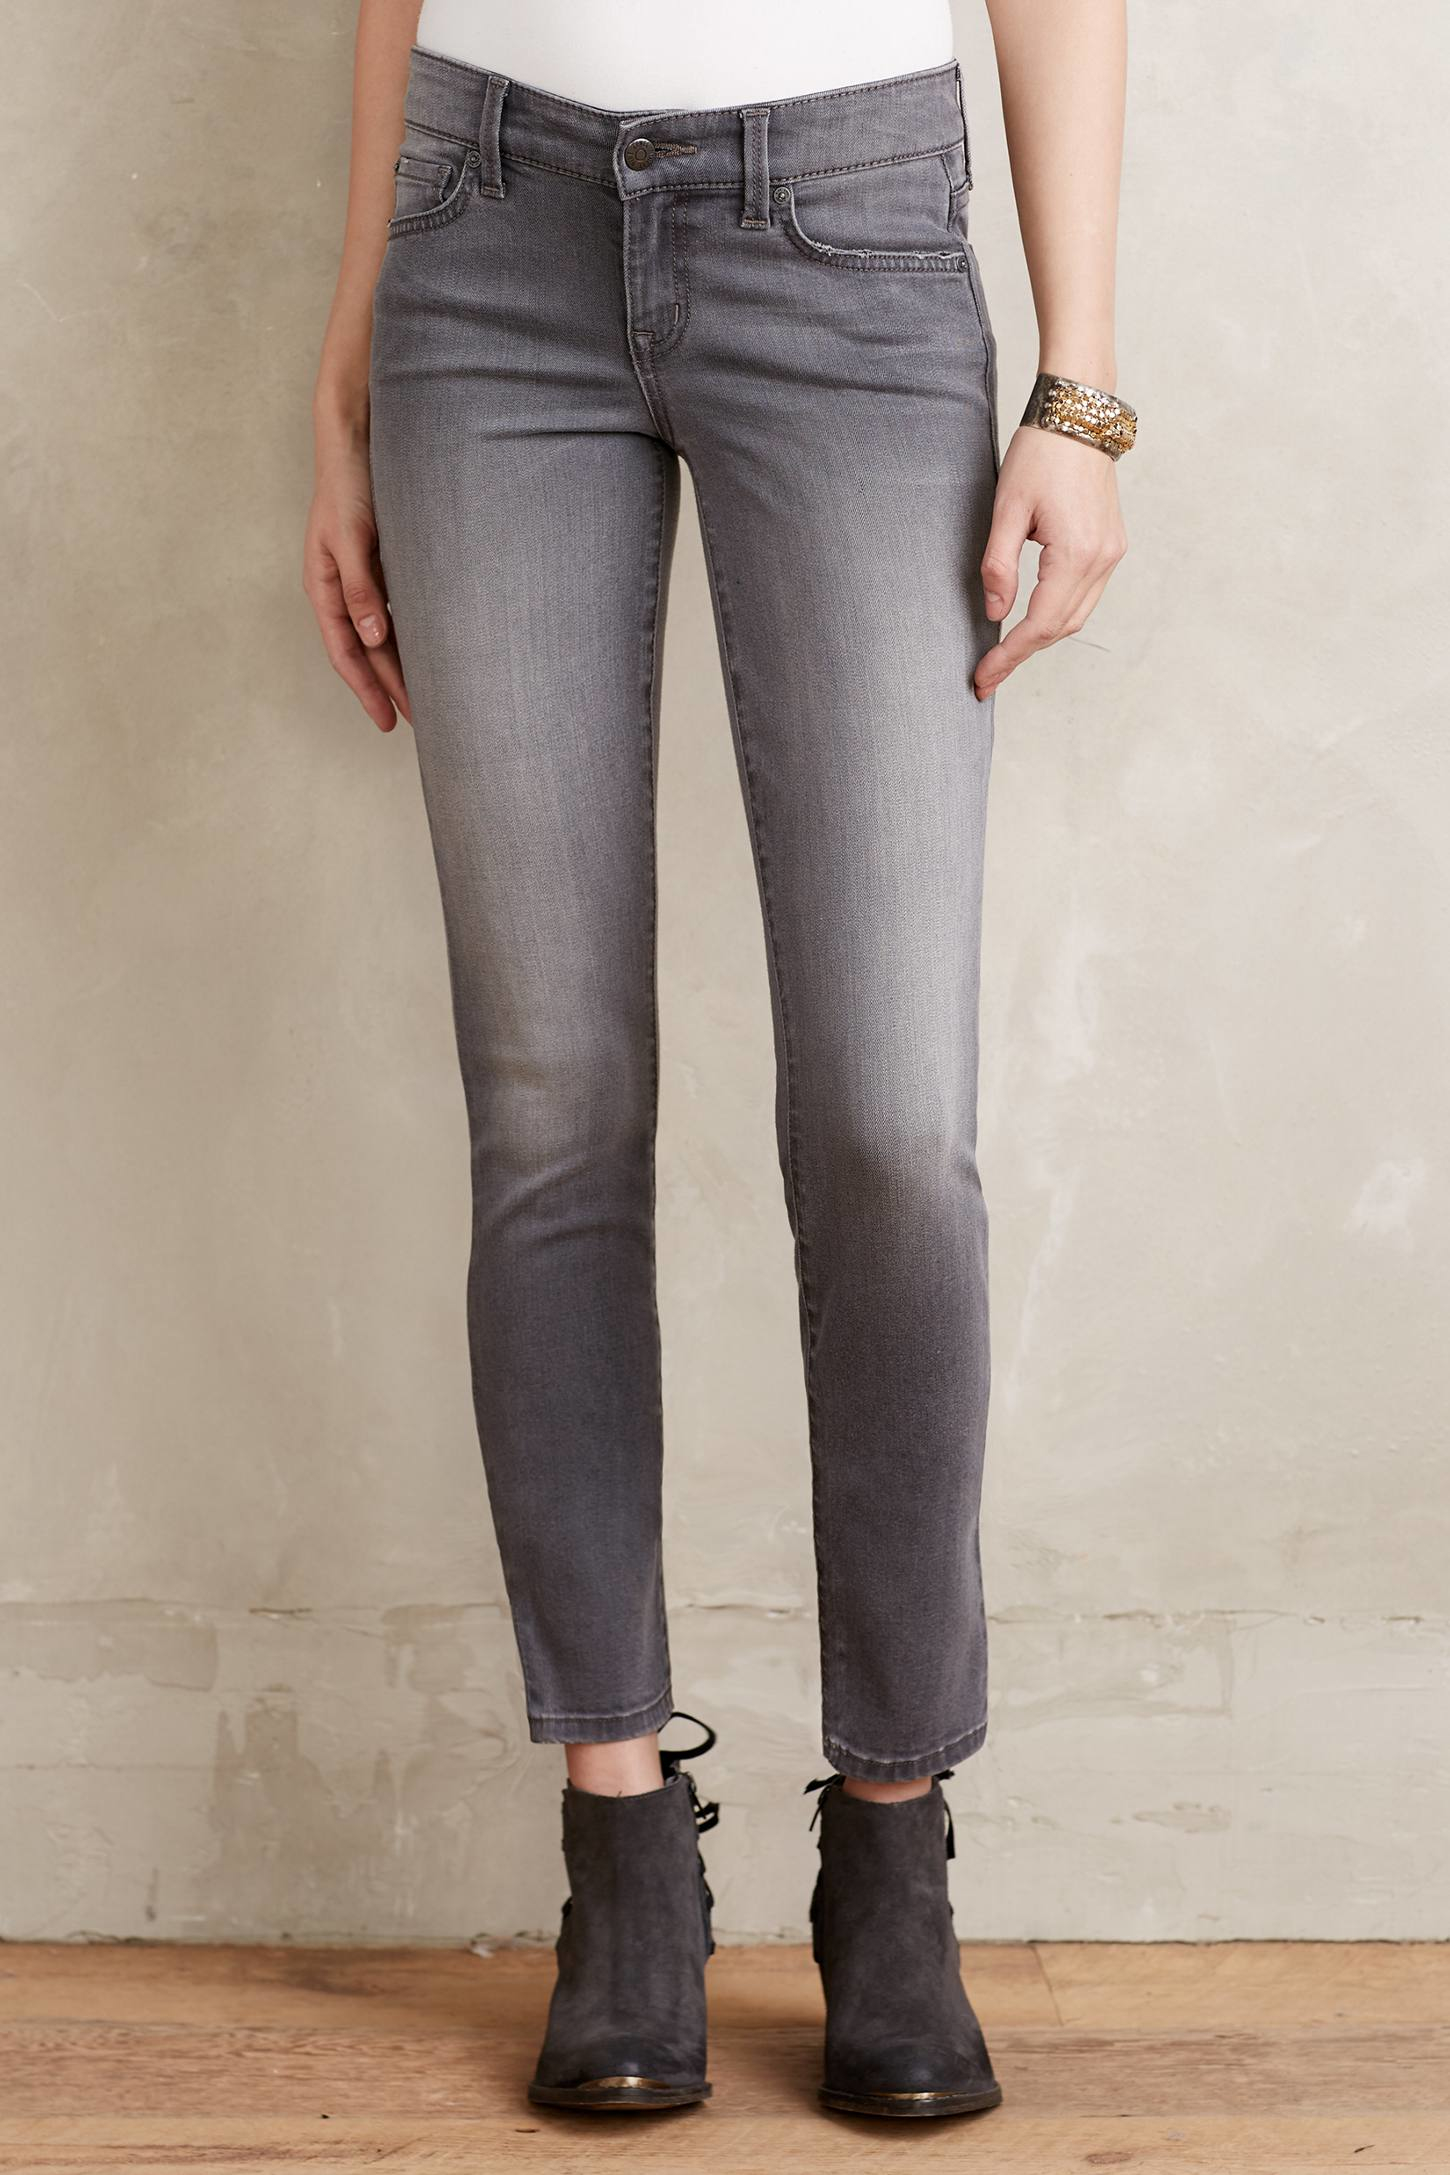 Lyst - Level 99 Lily Skinny Jeans in Gray